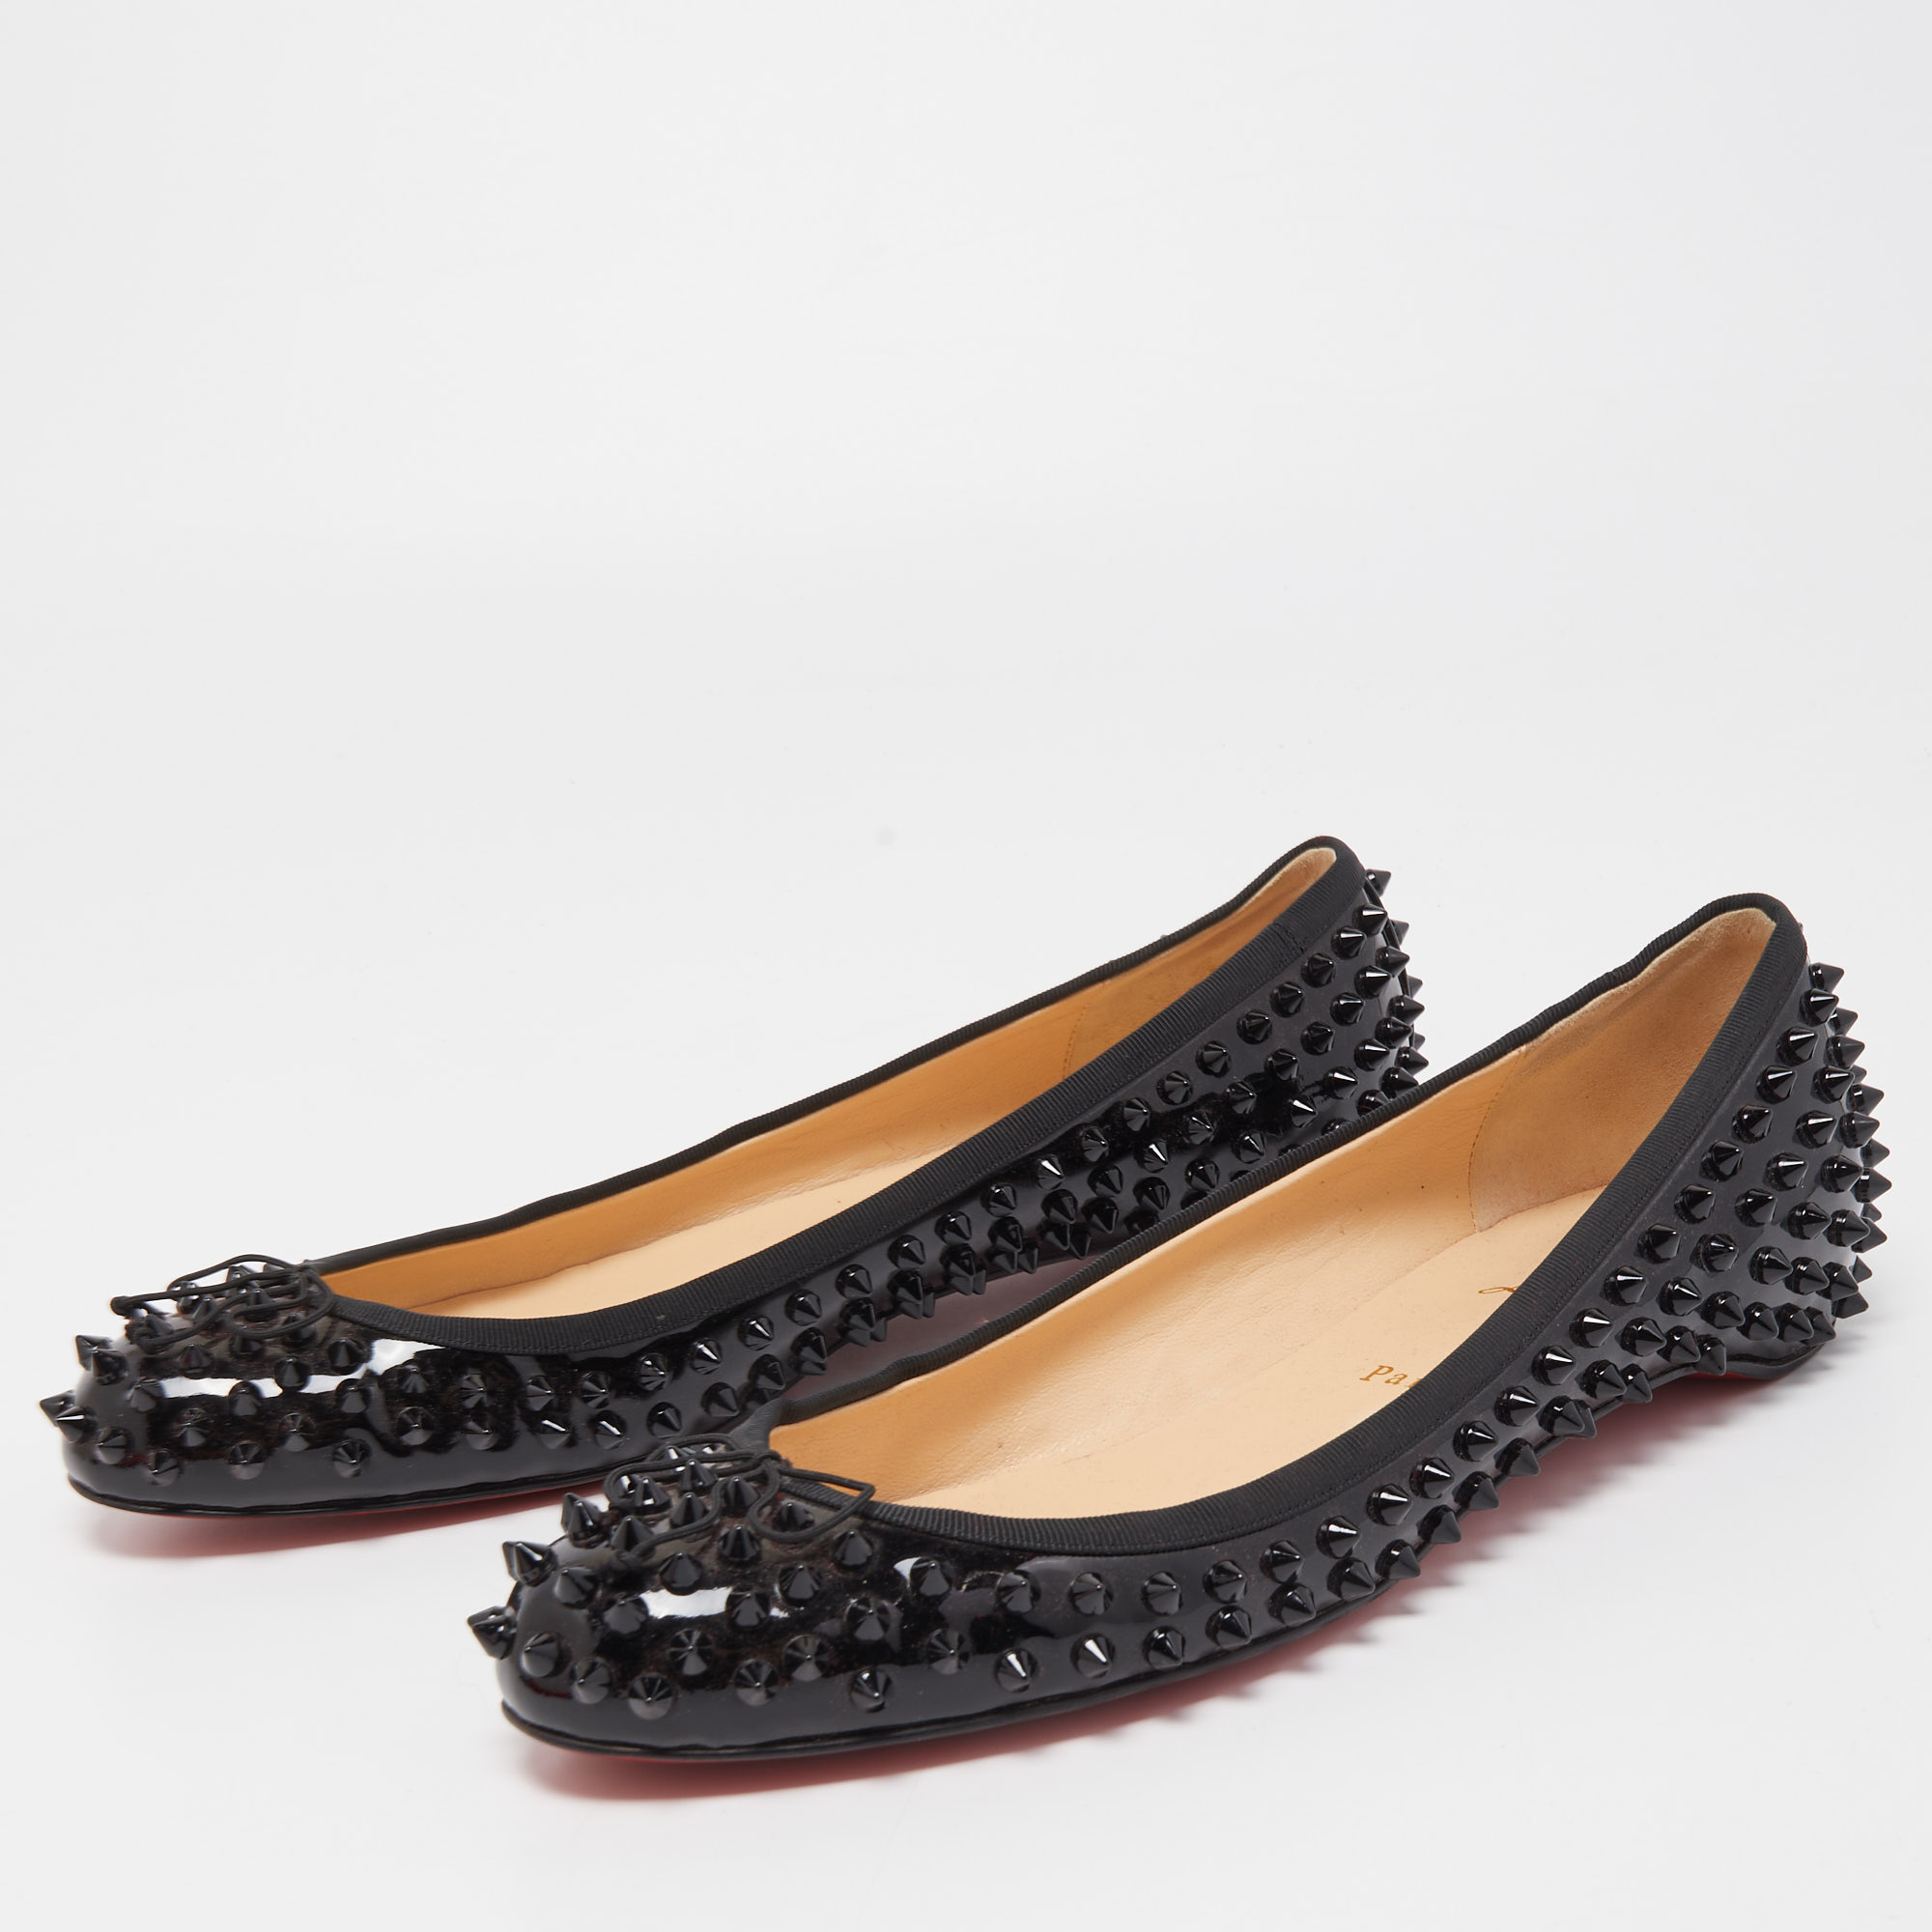 

Christian Louboutin Black Patent Leather Spiked Big Kiss Ballet Flats Size